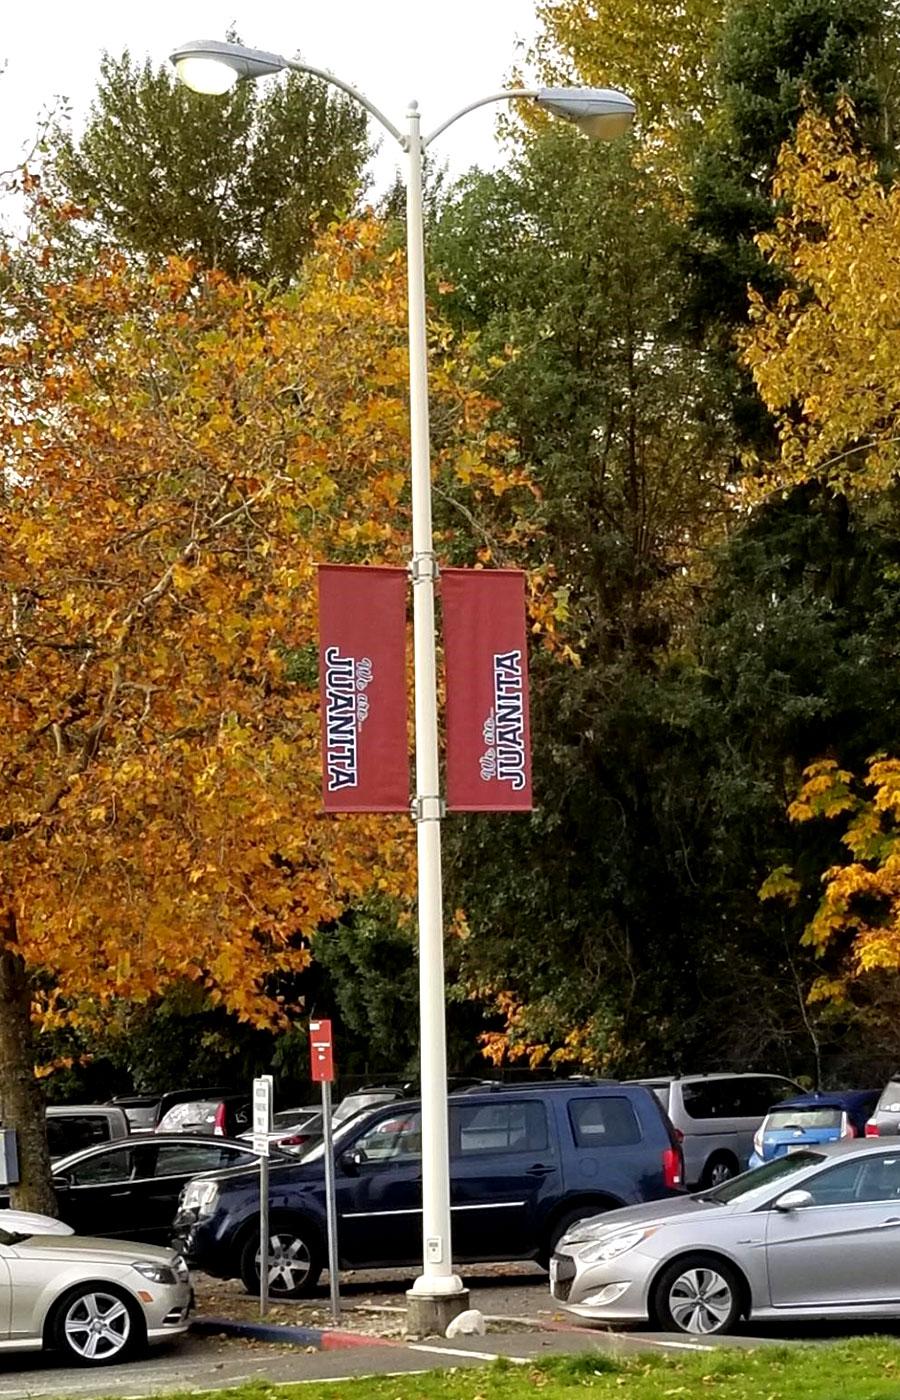 The Juanita High School sign package features a range of exterior signage needs - including pole banner hardware and printed banners.